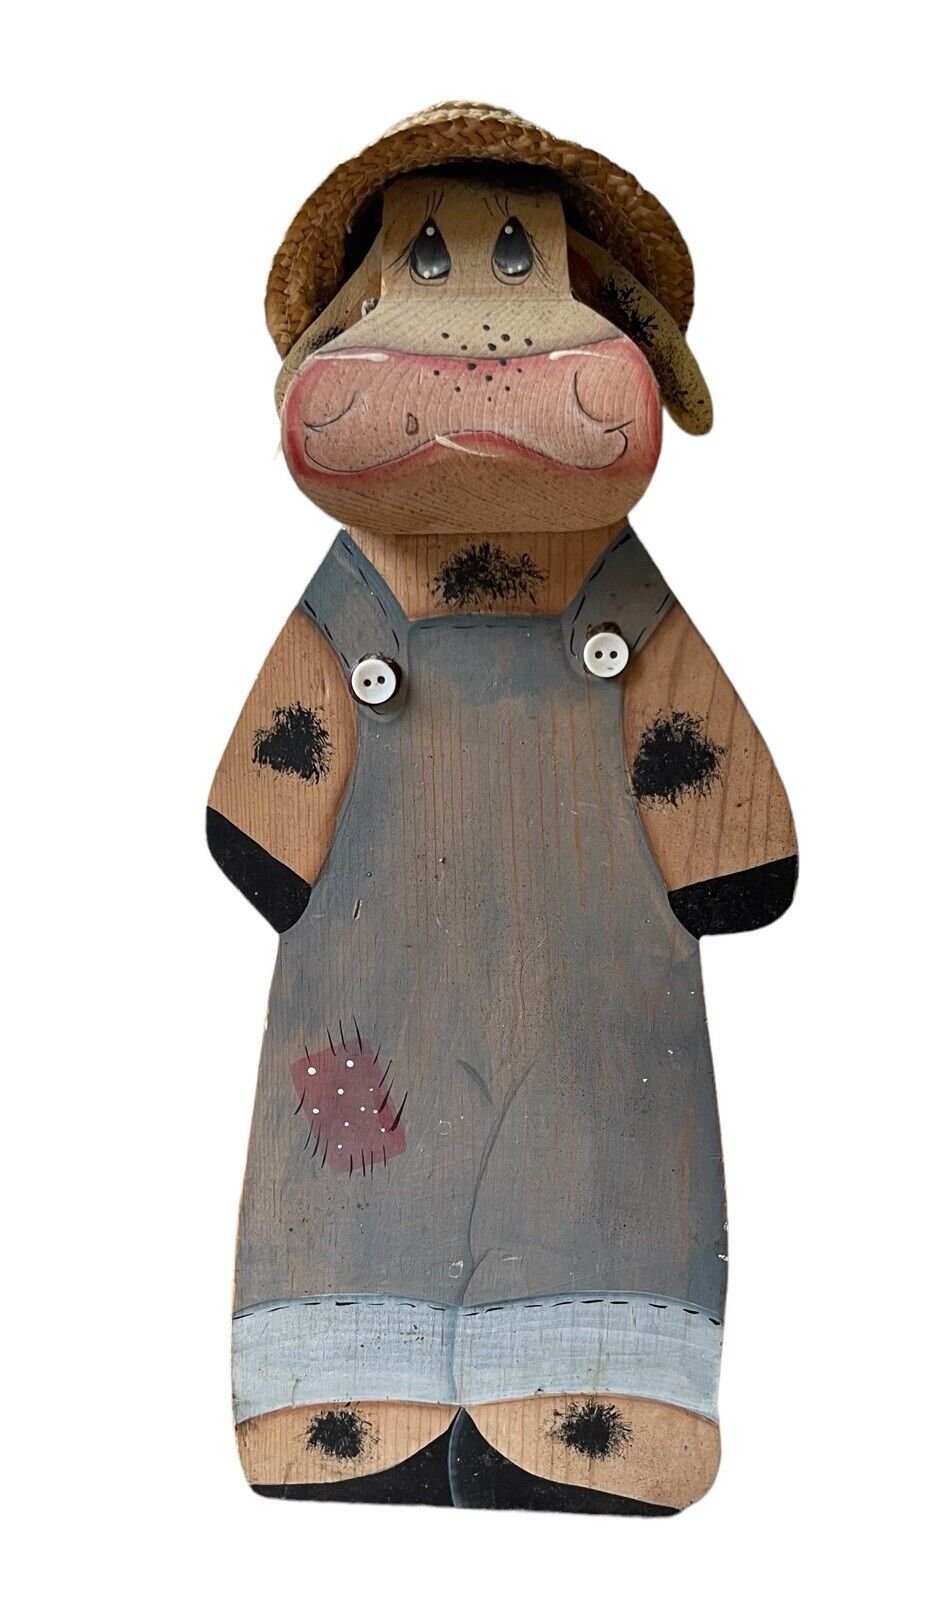 Wooden Country Cow Figure with Overalls & Straw Hat 15”